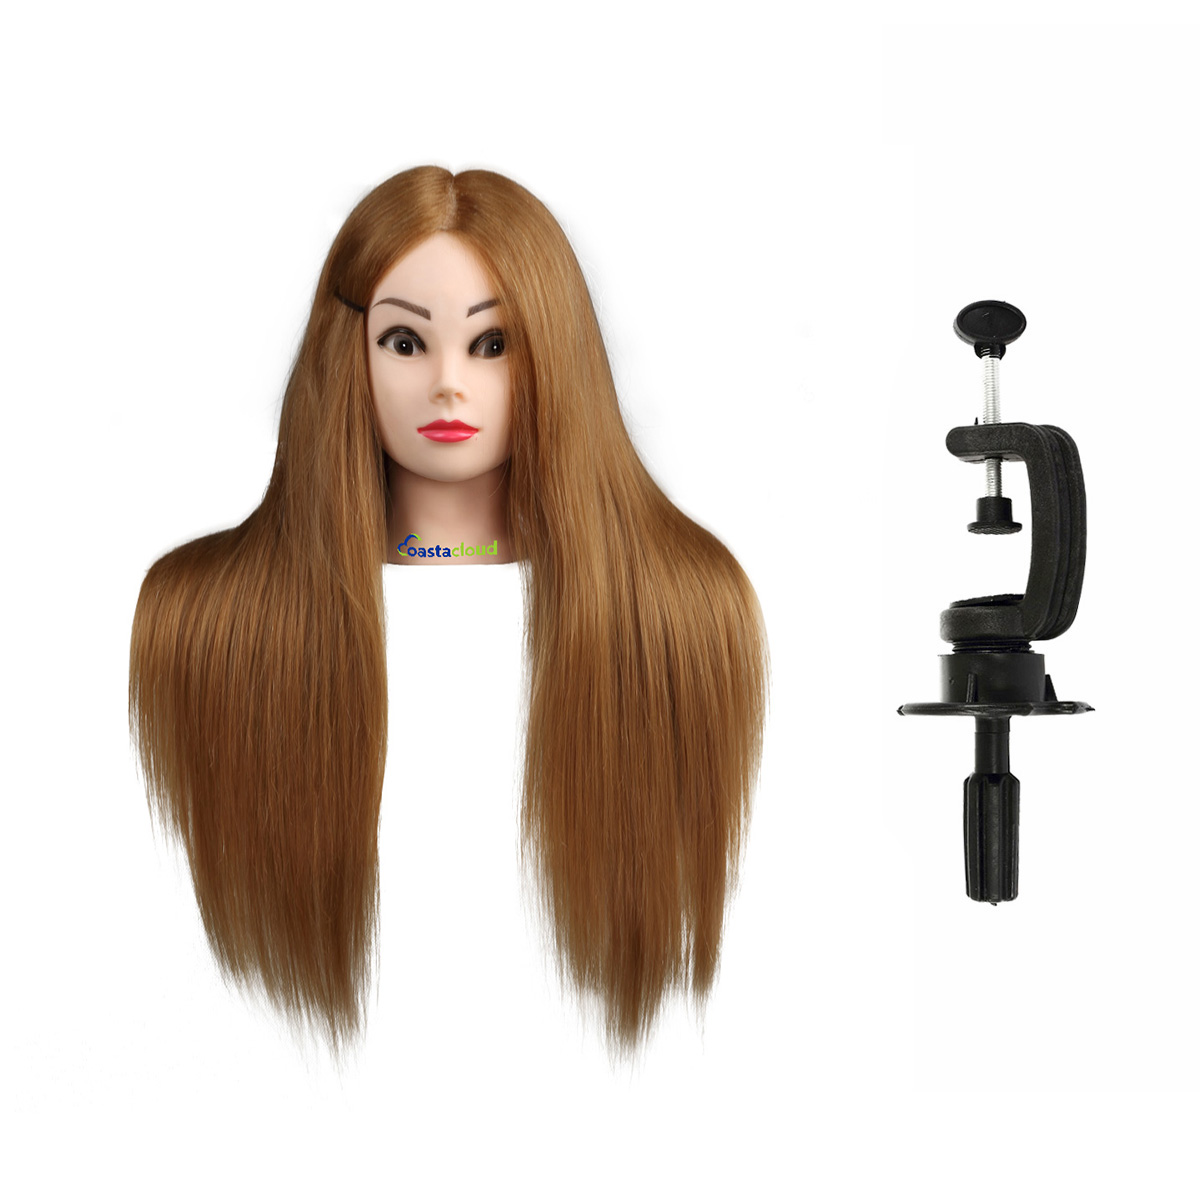 Mannequin head natural 80% human hair used for practicing hair